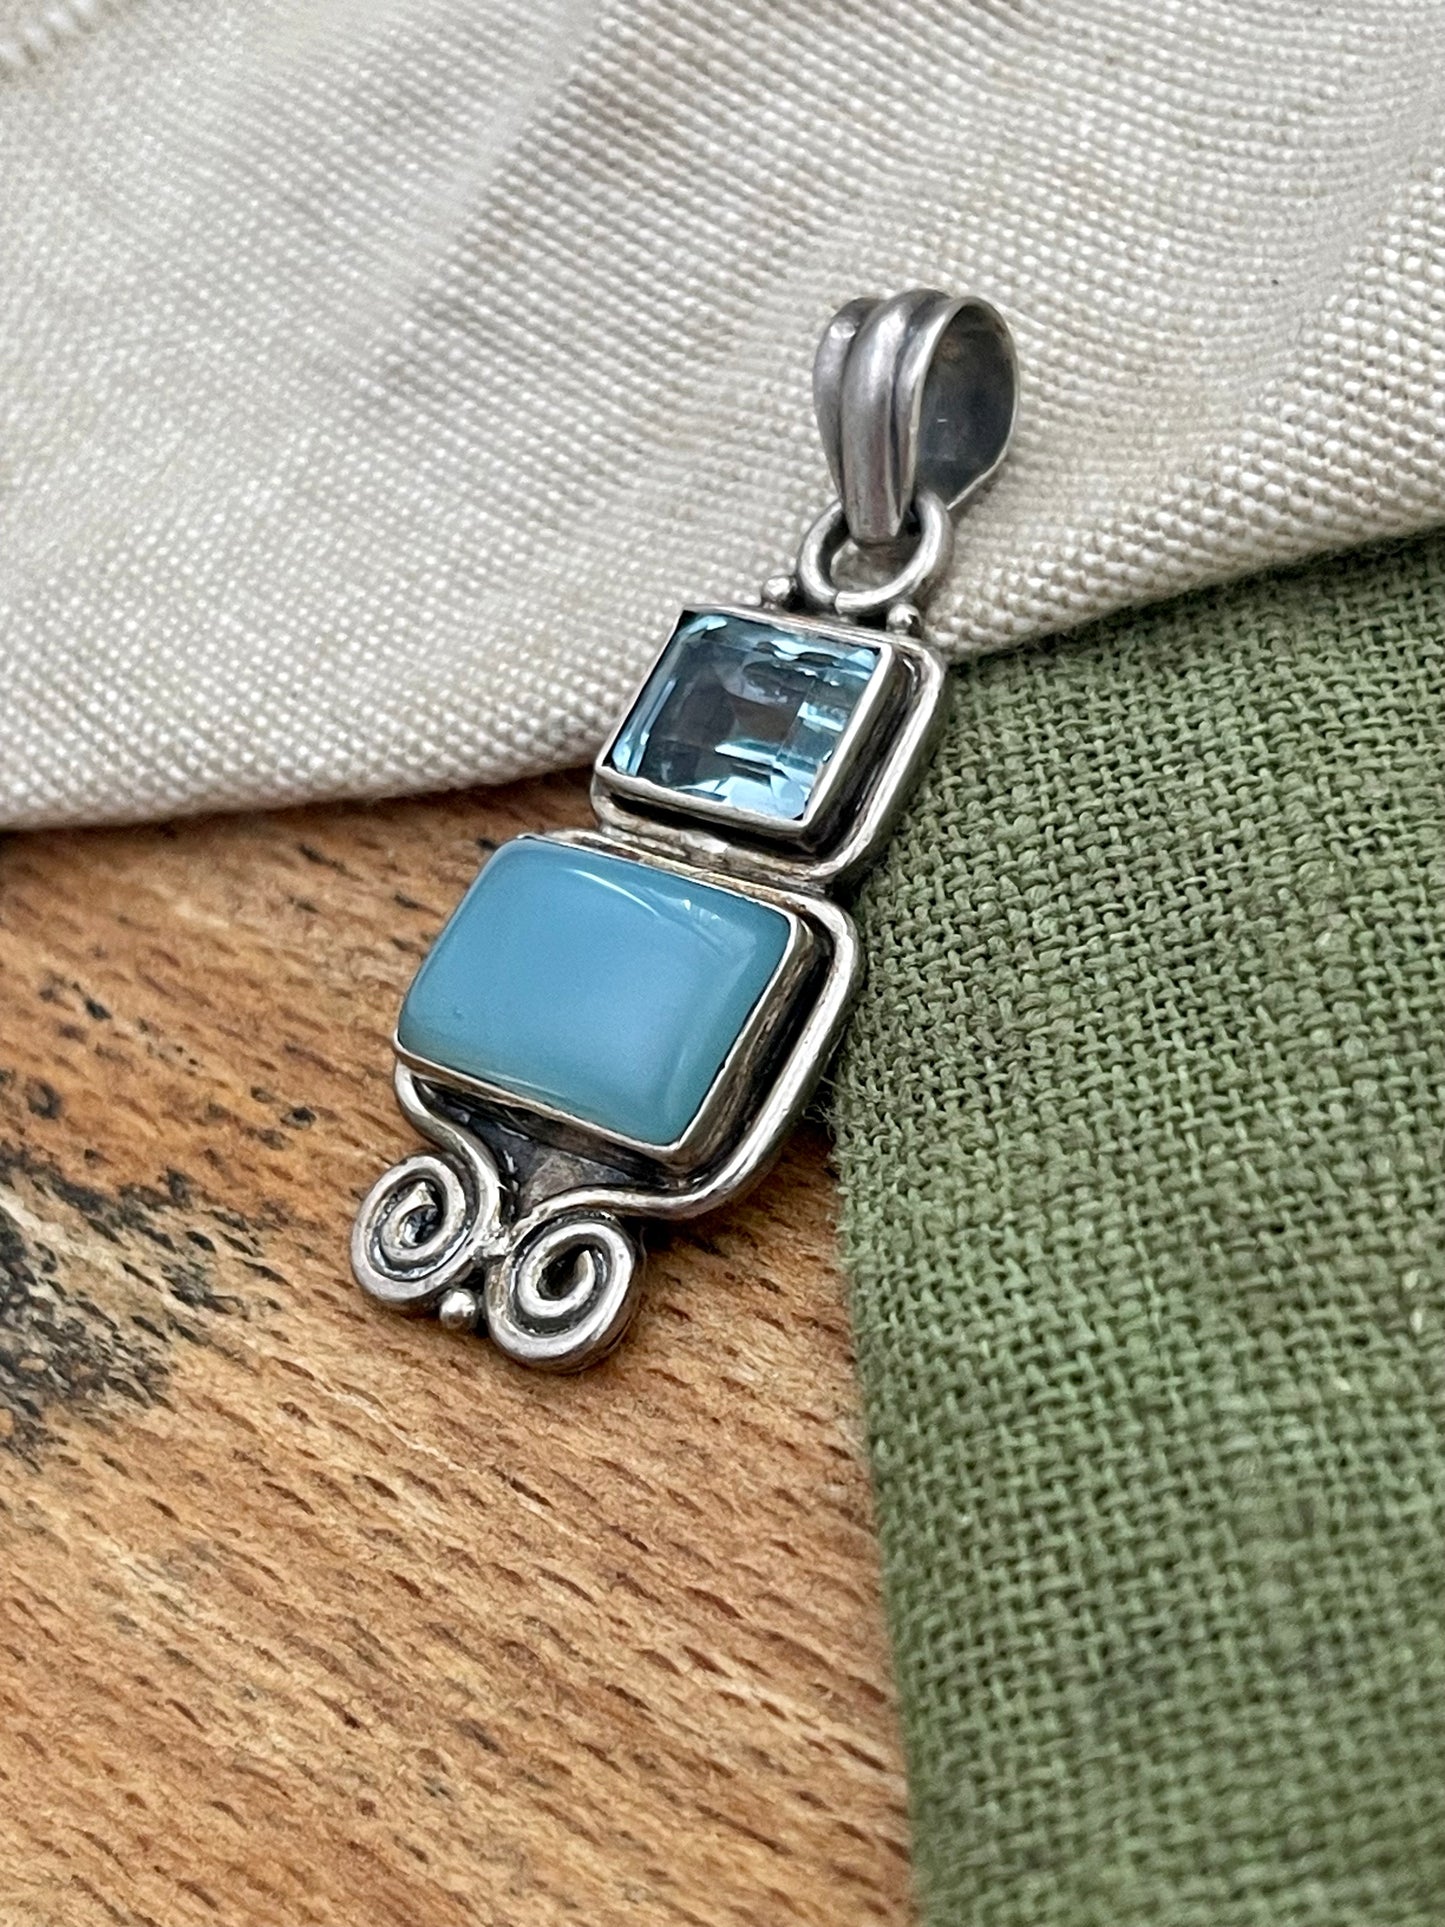 Sky Blue South American Large Handmade Pendent Solid 925 Sterling Silver Vintage